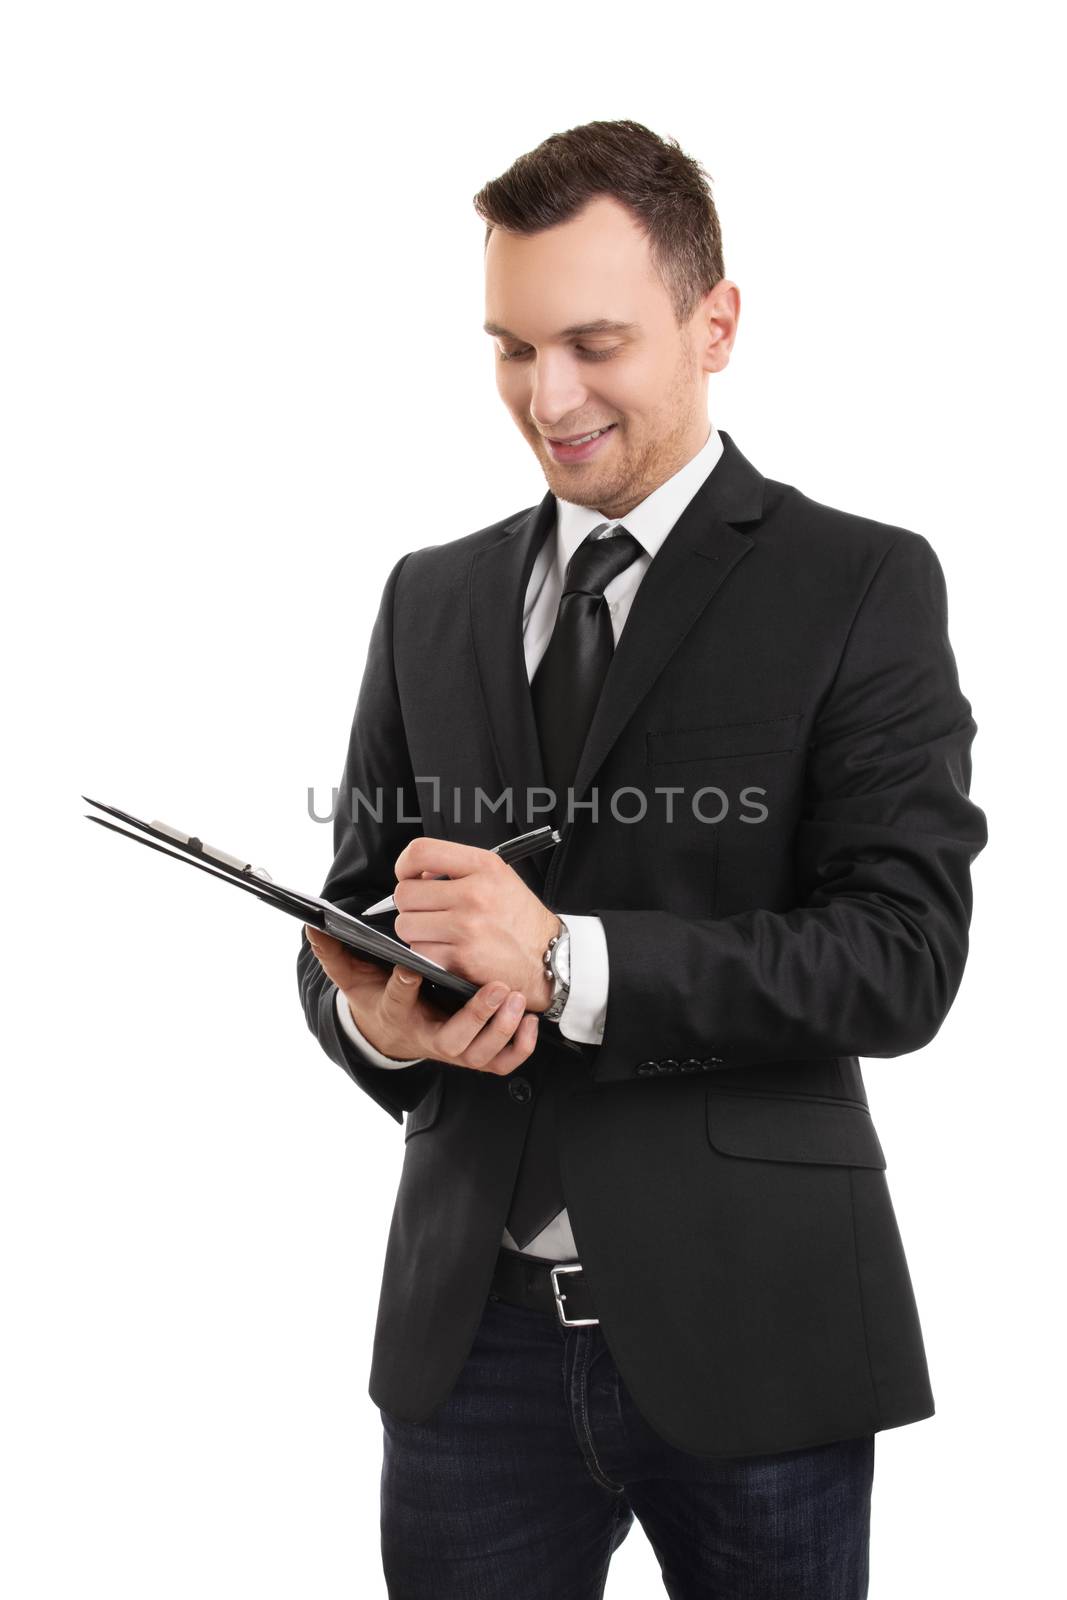 A portrait of a young businessman dressed in business casual clothes, writing on a clipboard, isolated on white background.

